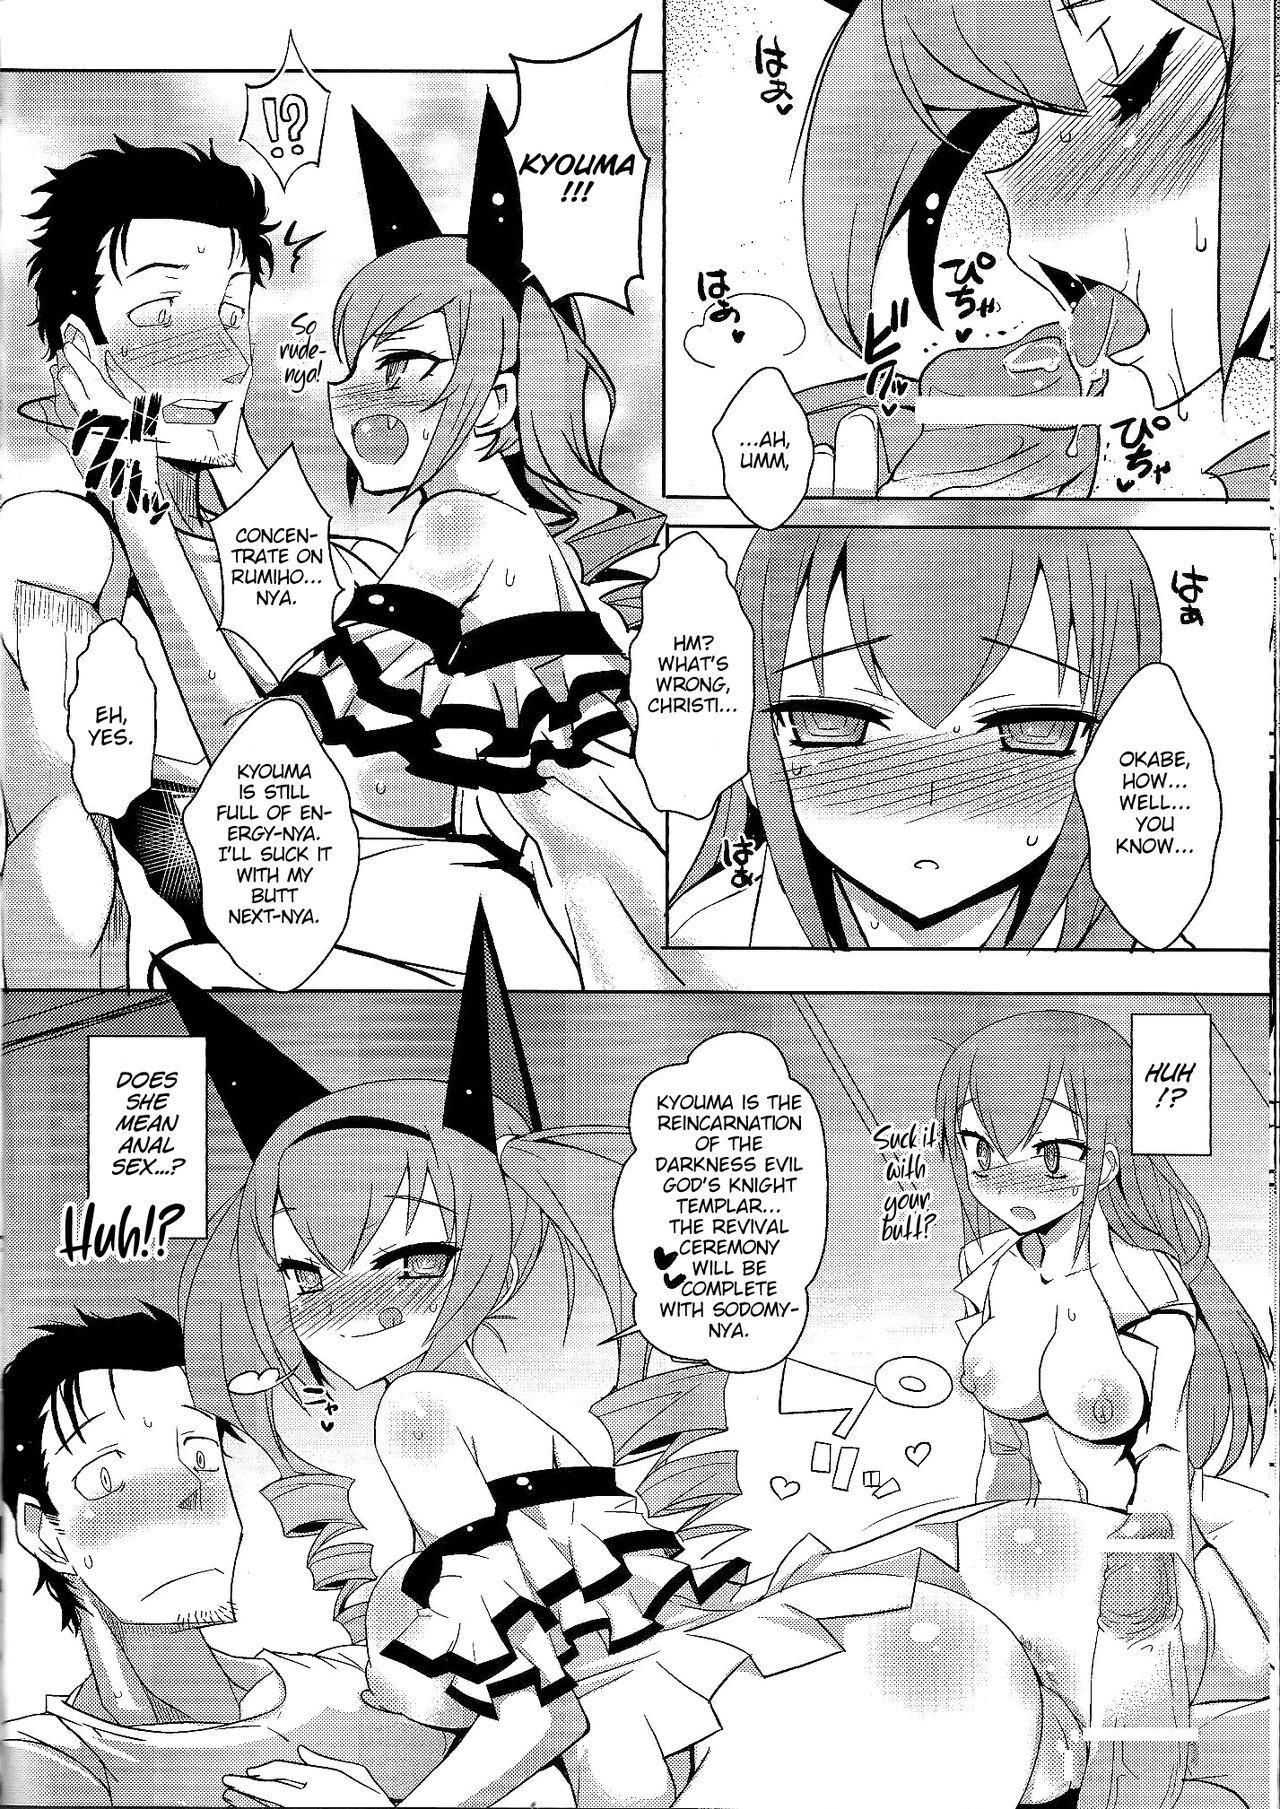 British Kenjin Chijou no Sodoministers - Steinsgate Gang - Page 11